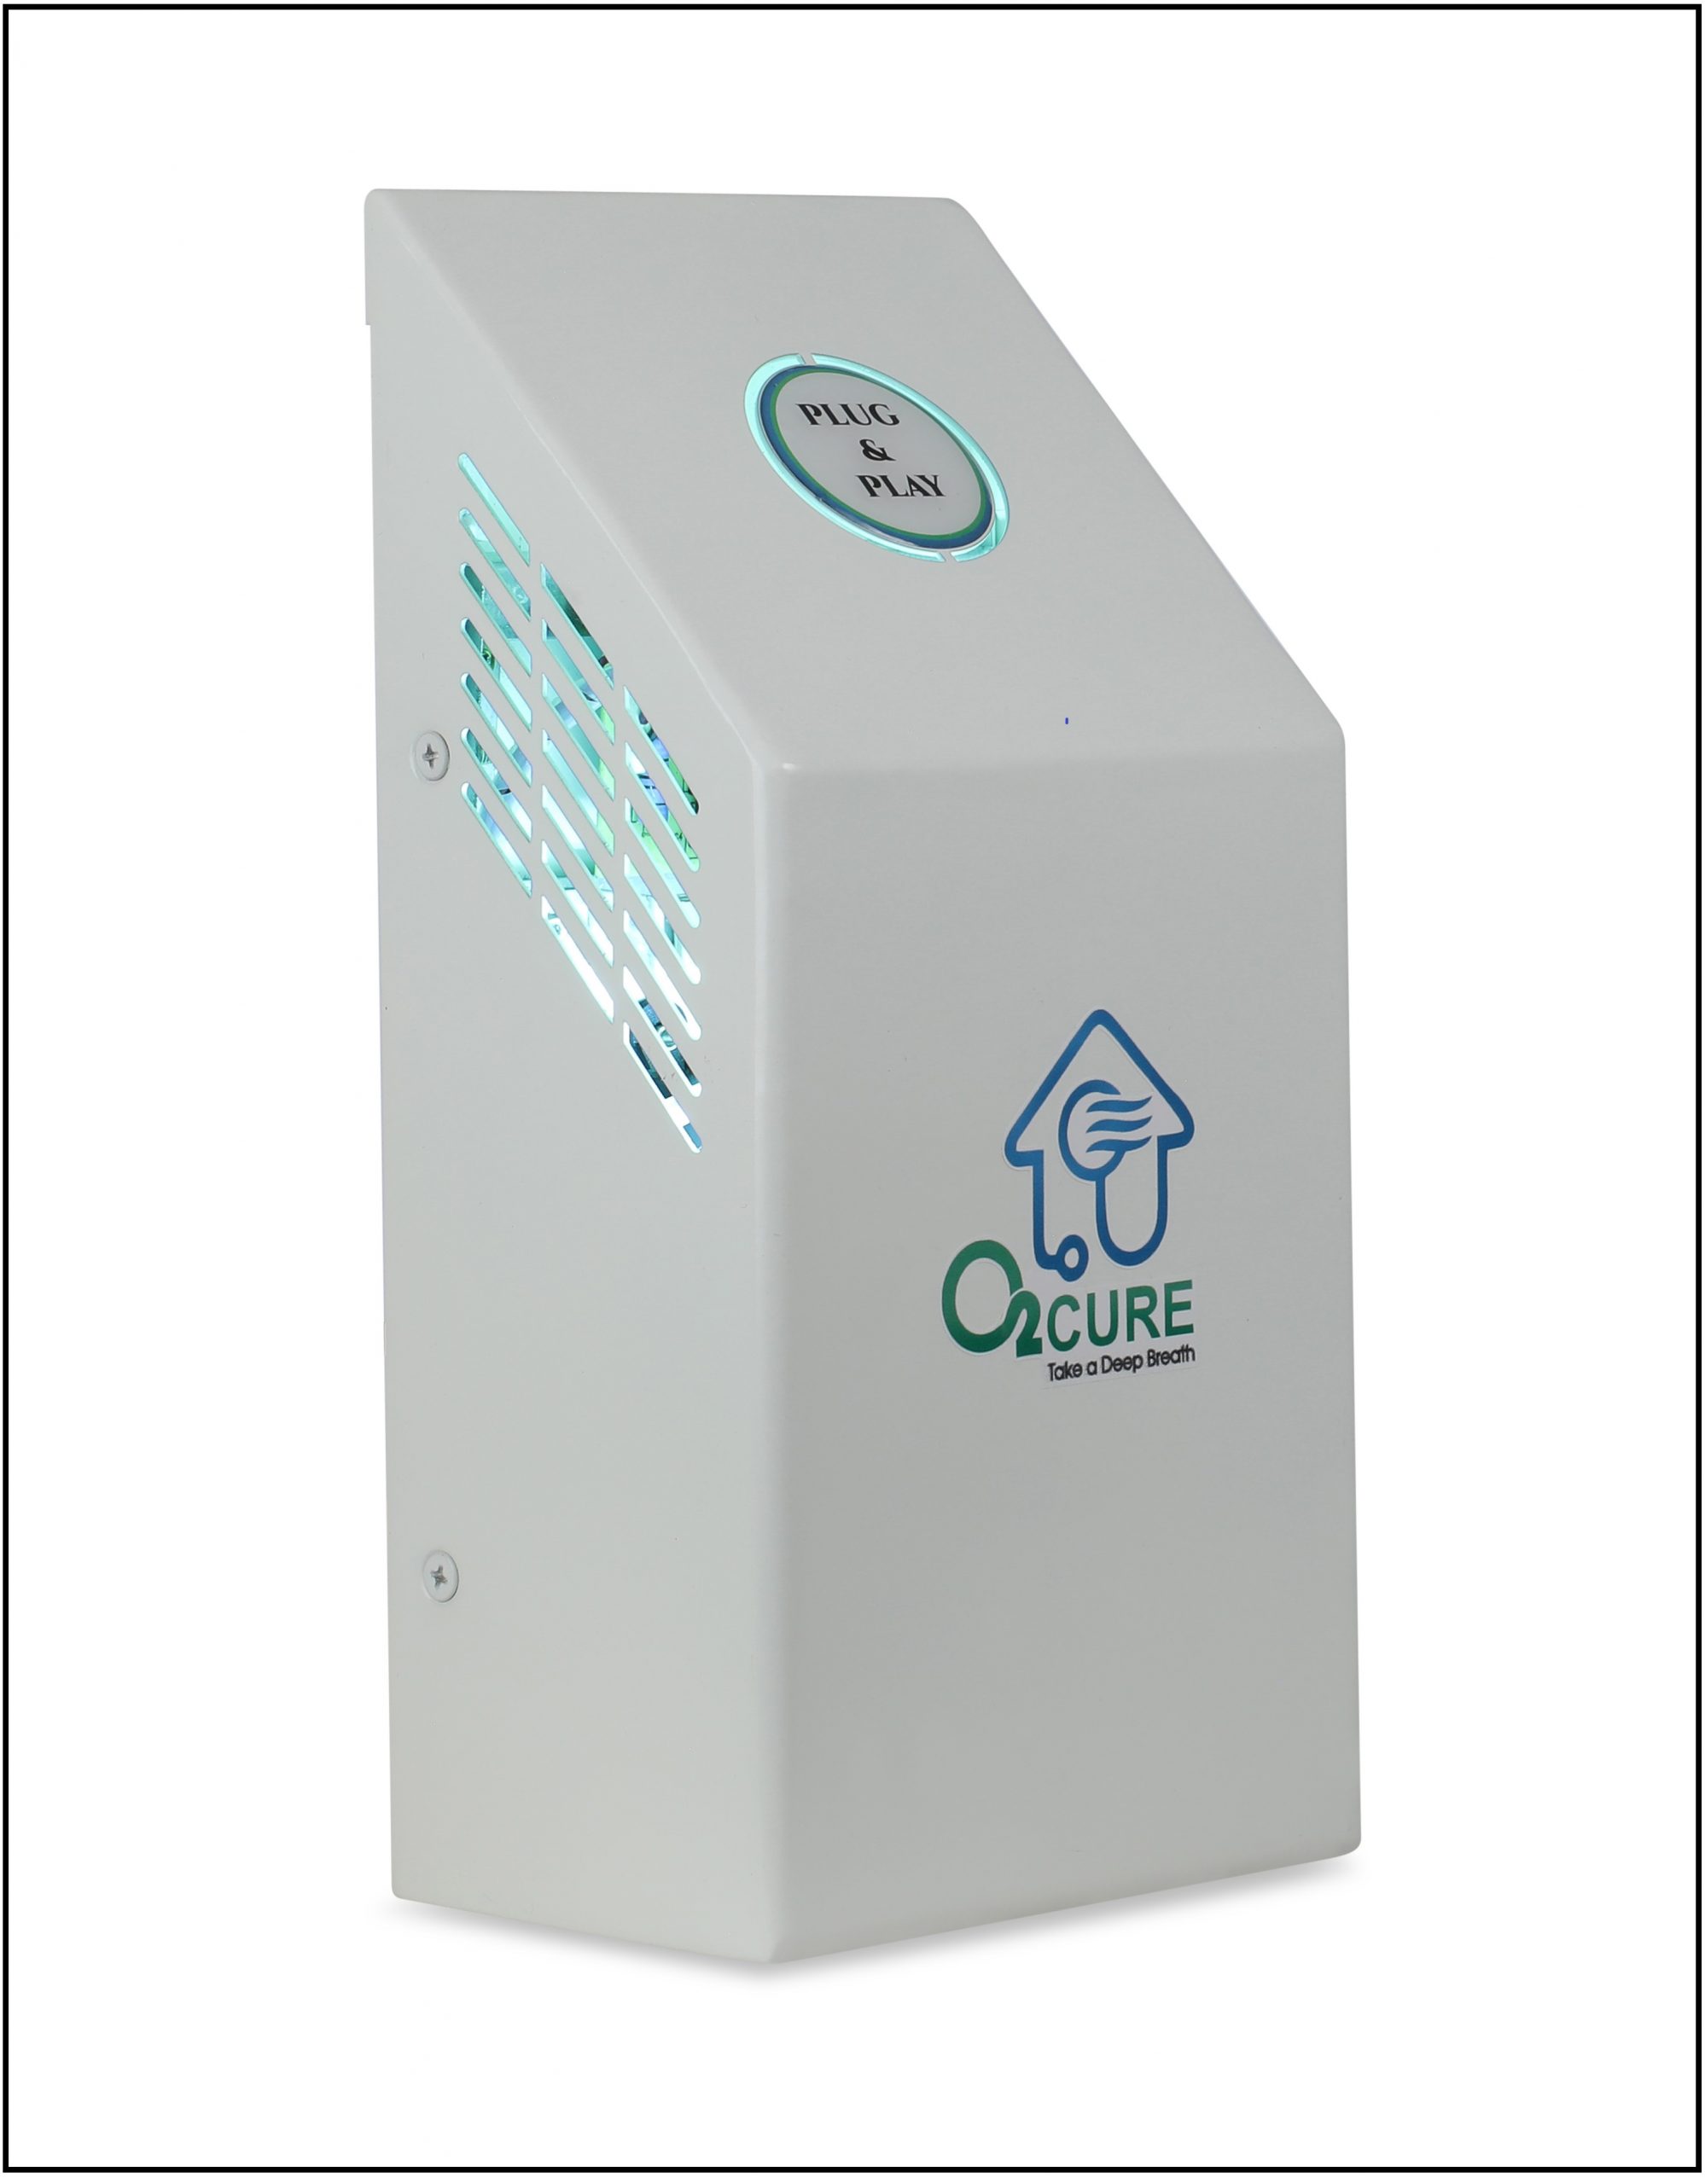 Plug & Play a lightweight air purifier, successfully proven & tested for neutralizing the novel Coronavirus upto 99%